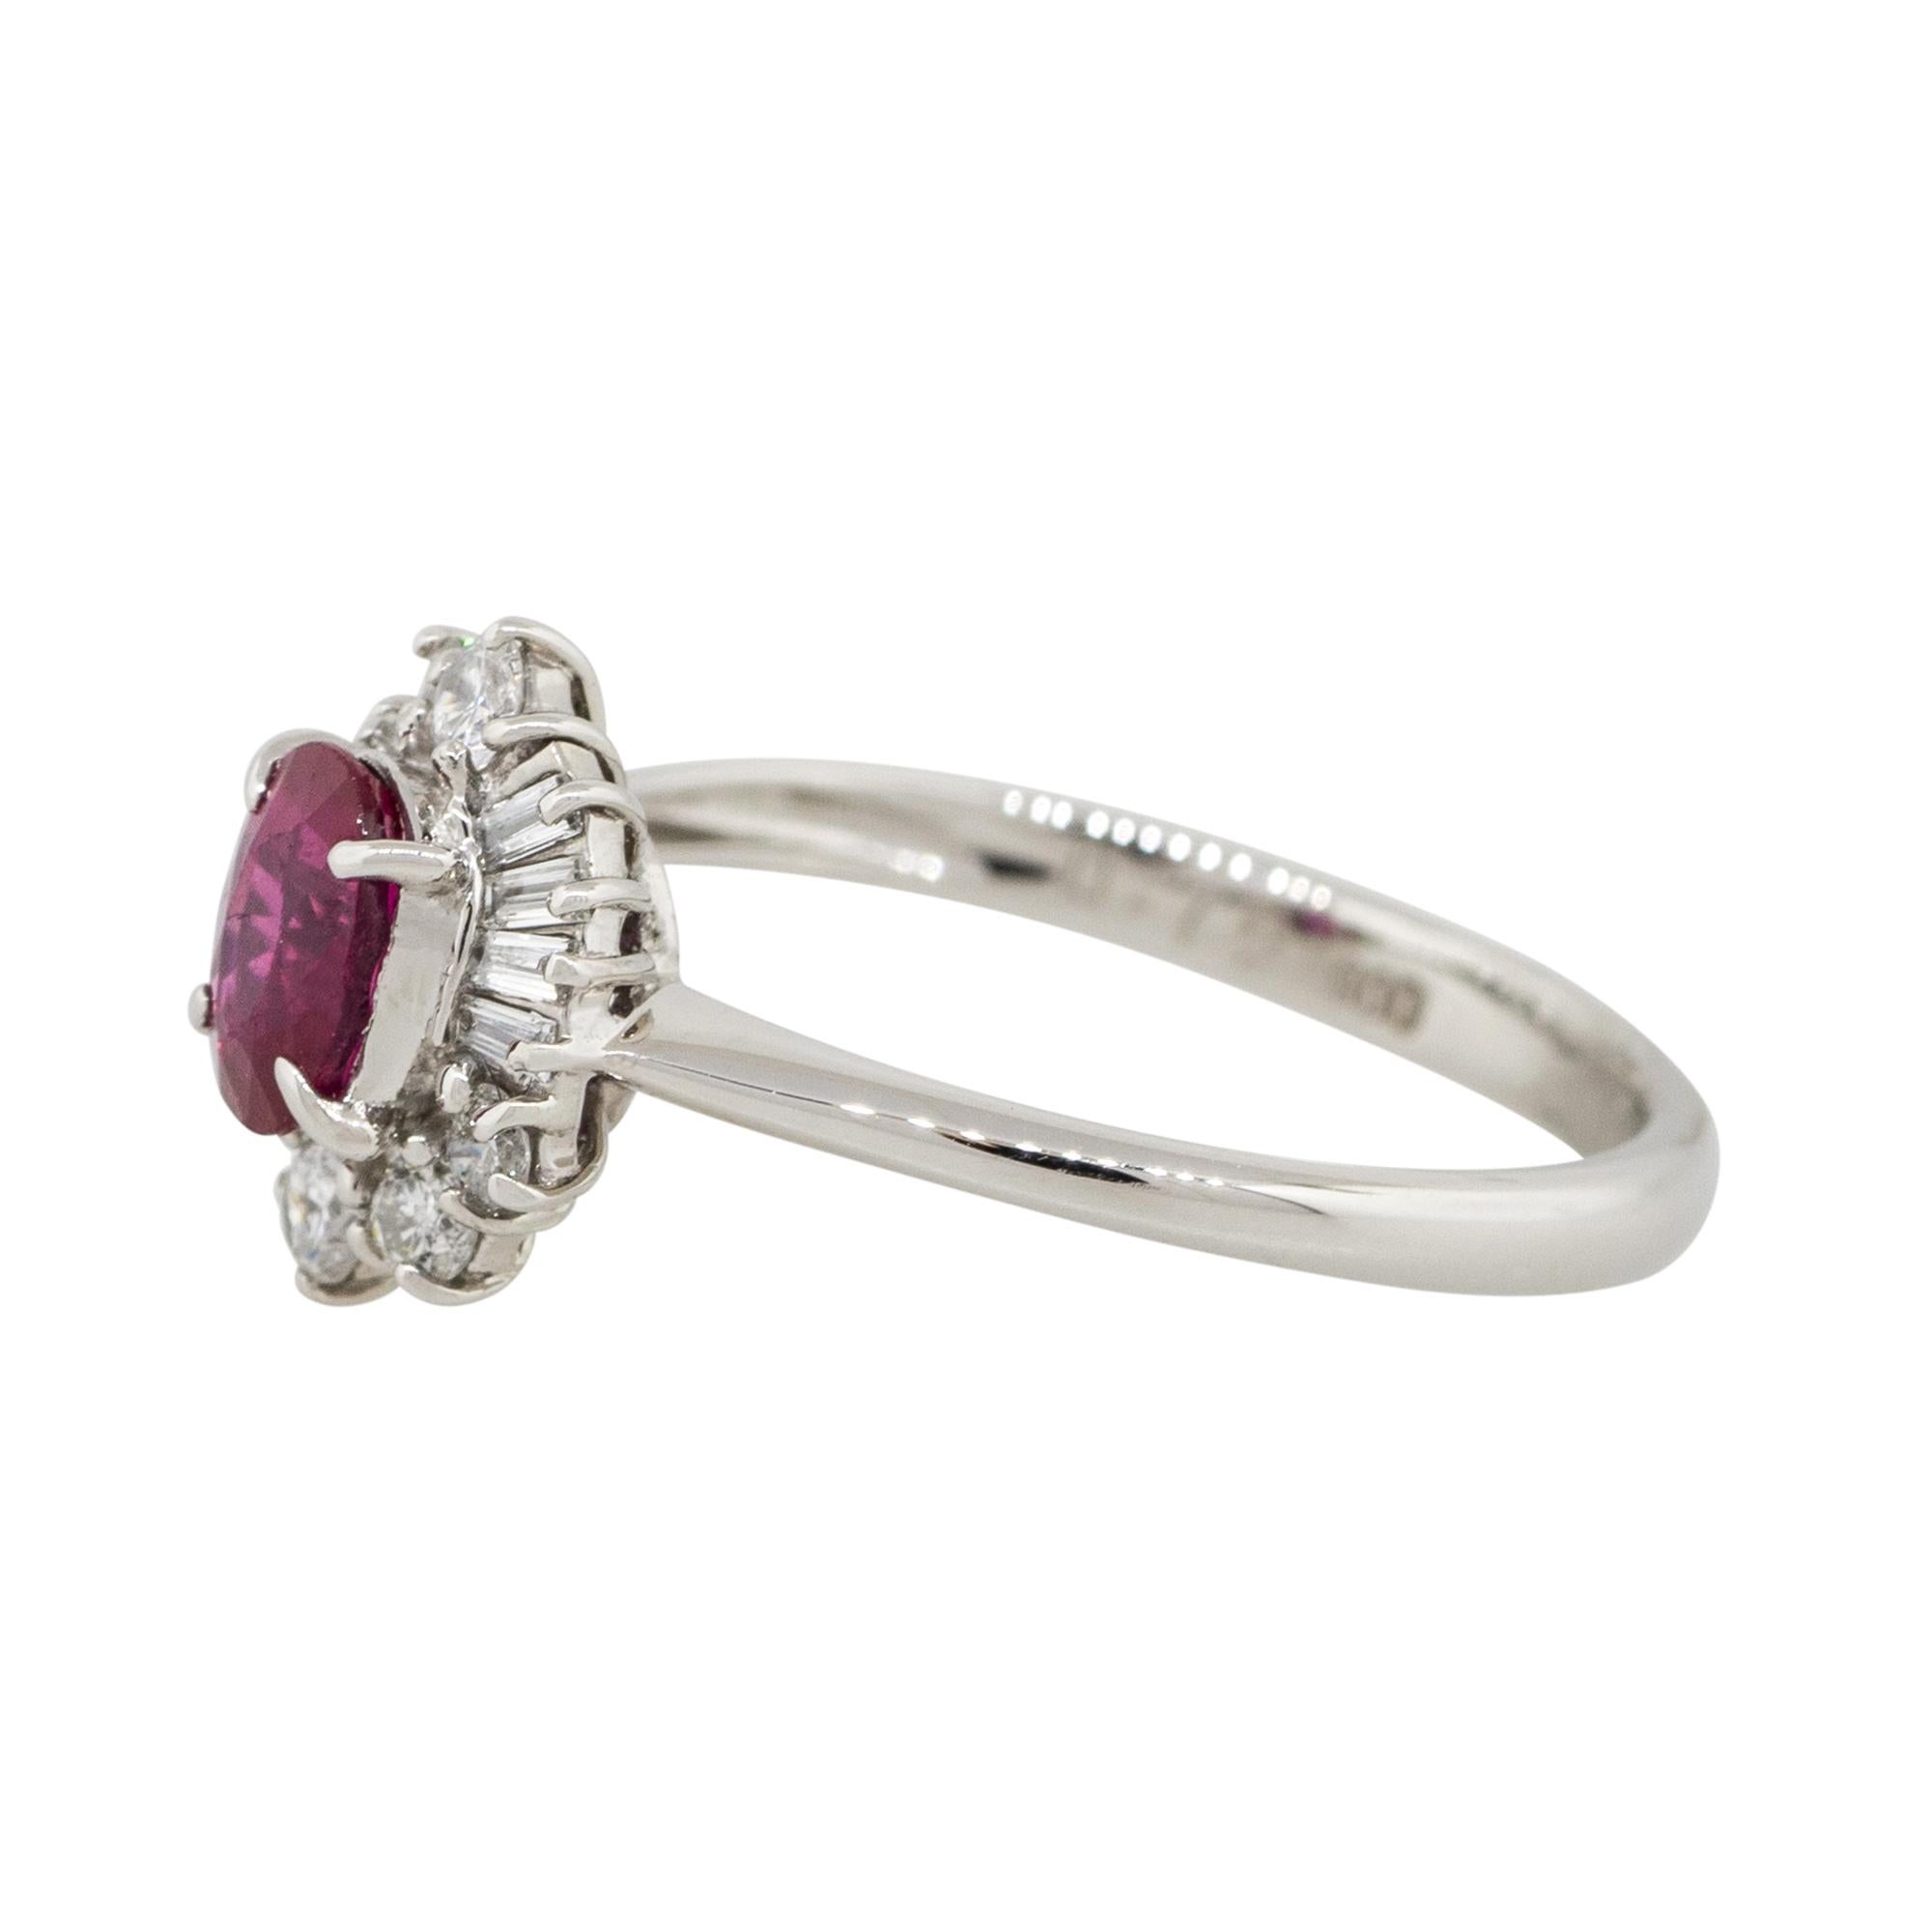 Material: Platinum
Gemstone details: Approx. 0.72ctw oval shaped Ruby center gemstone
Diamond details: Approx. 0.26ctw of round and baguette cut Diamonds. Diamonds are G/H in color and VS in clarity
Ring Size: 6   
Ring Measurements: 0.75